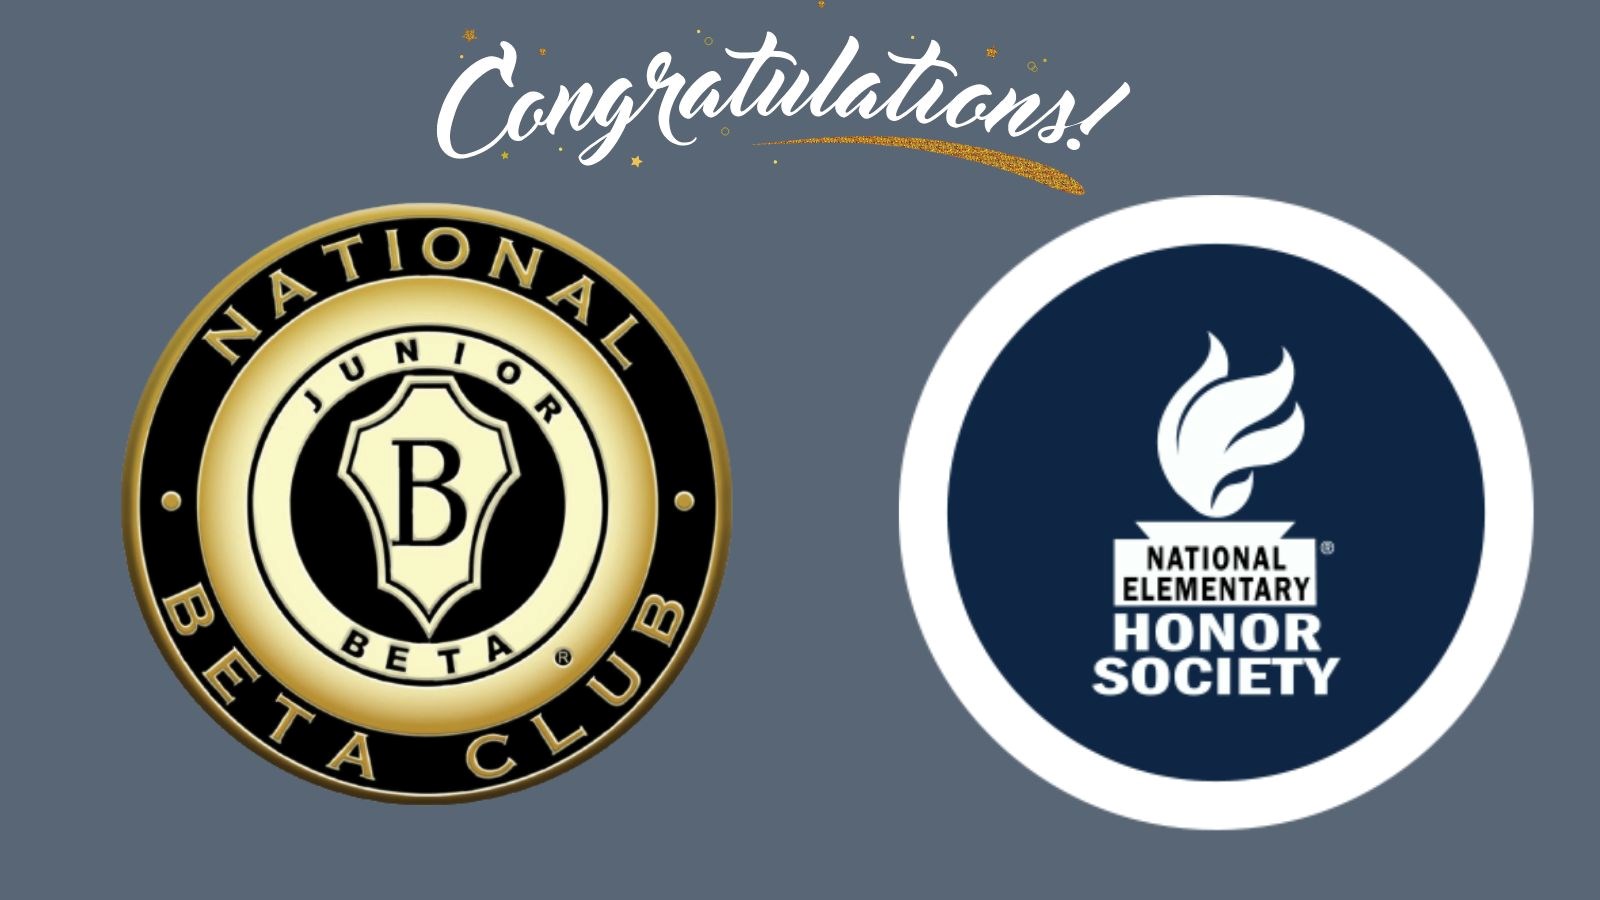 Congratulations above 2 logos: one for the Junior Beta Club and the other for the National Elementary Honor Society